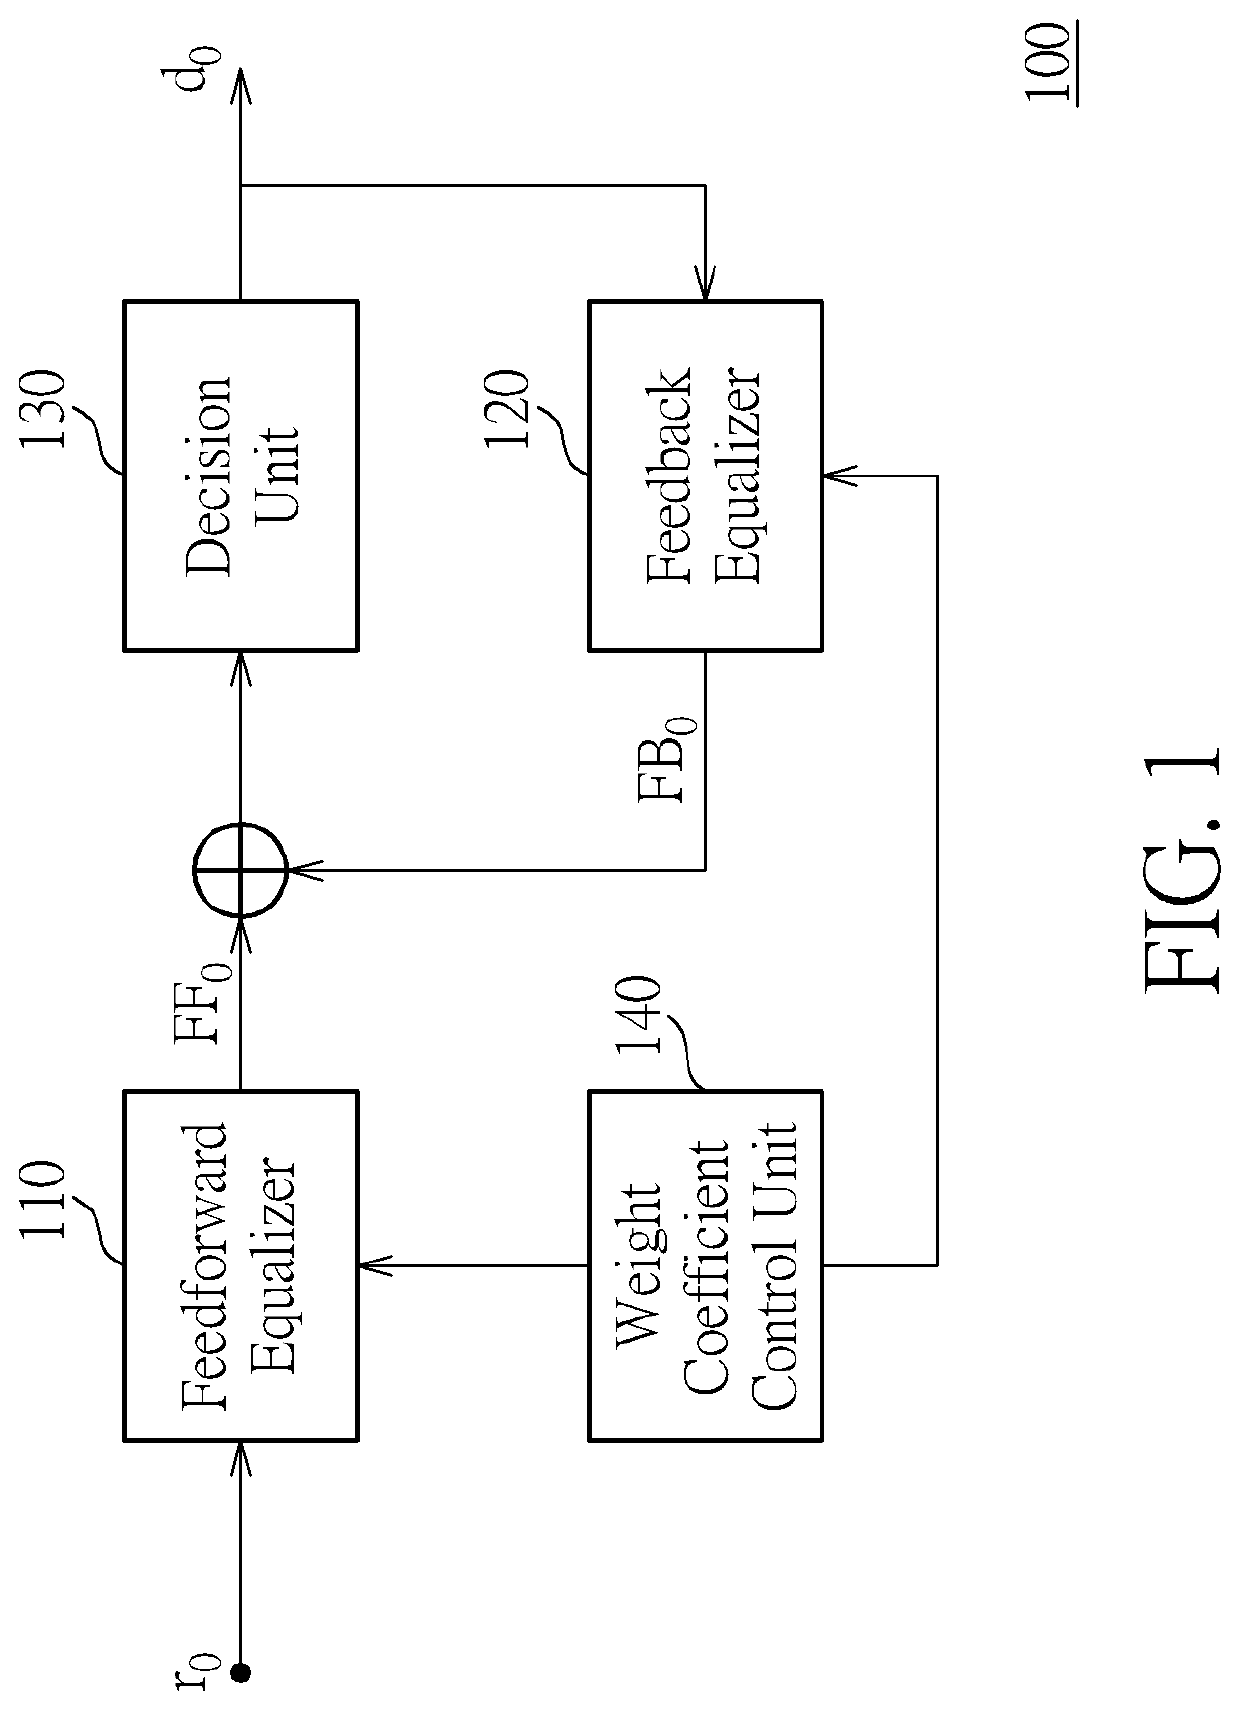 Decision feedback equalizer and related control method